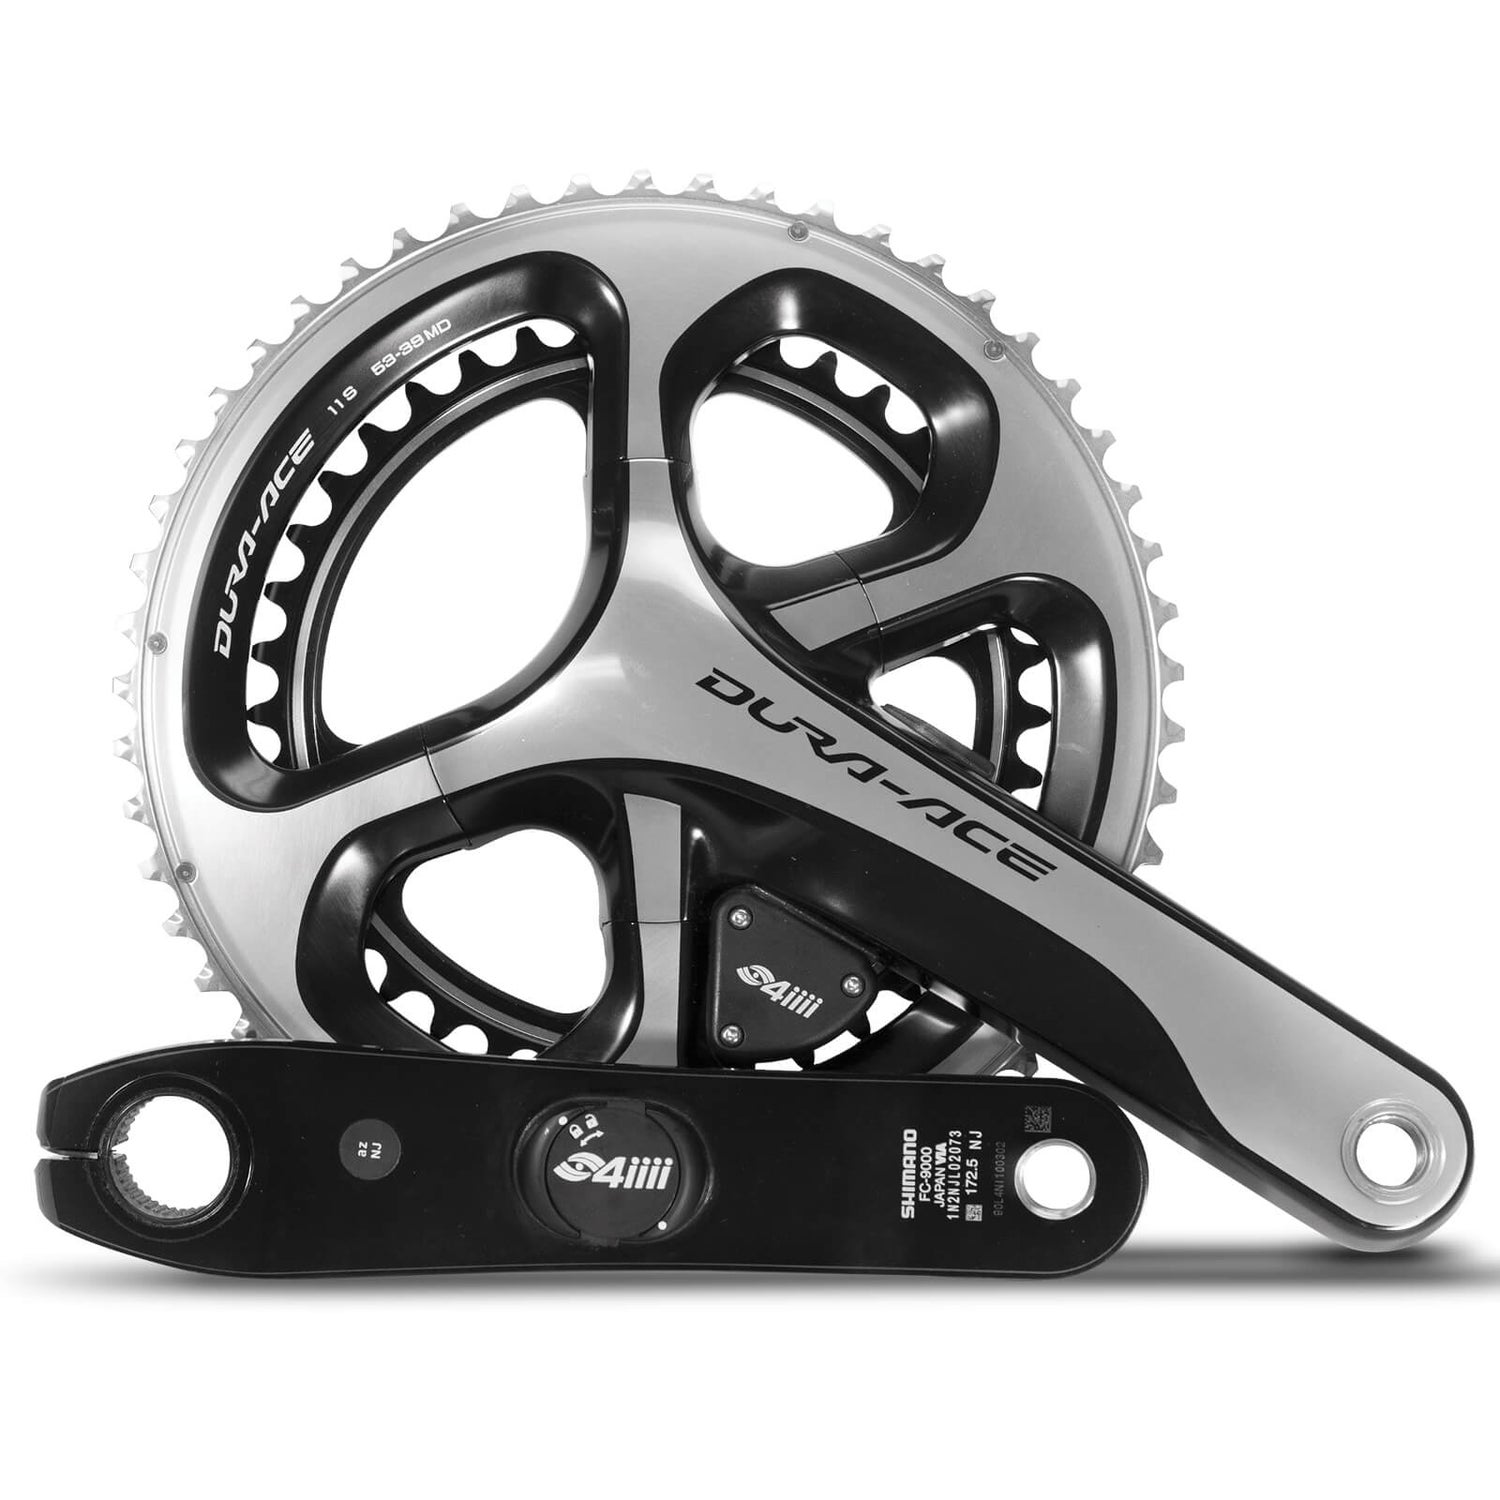 4iiii Precision Pro Dual Sided Power Meter - Dura Ace R9000 - Certified  Reconditioned